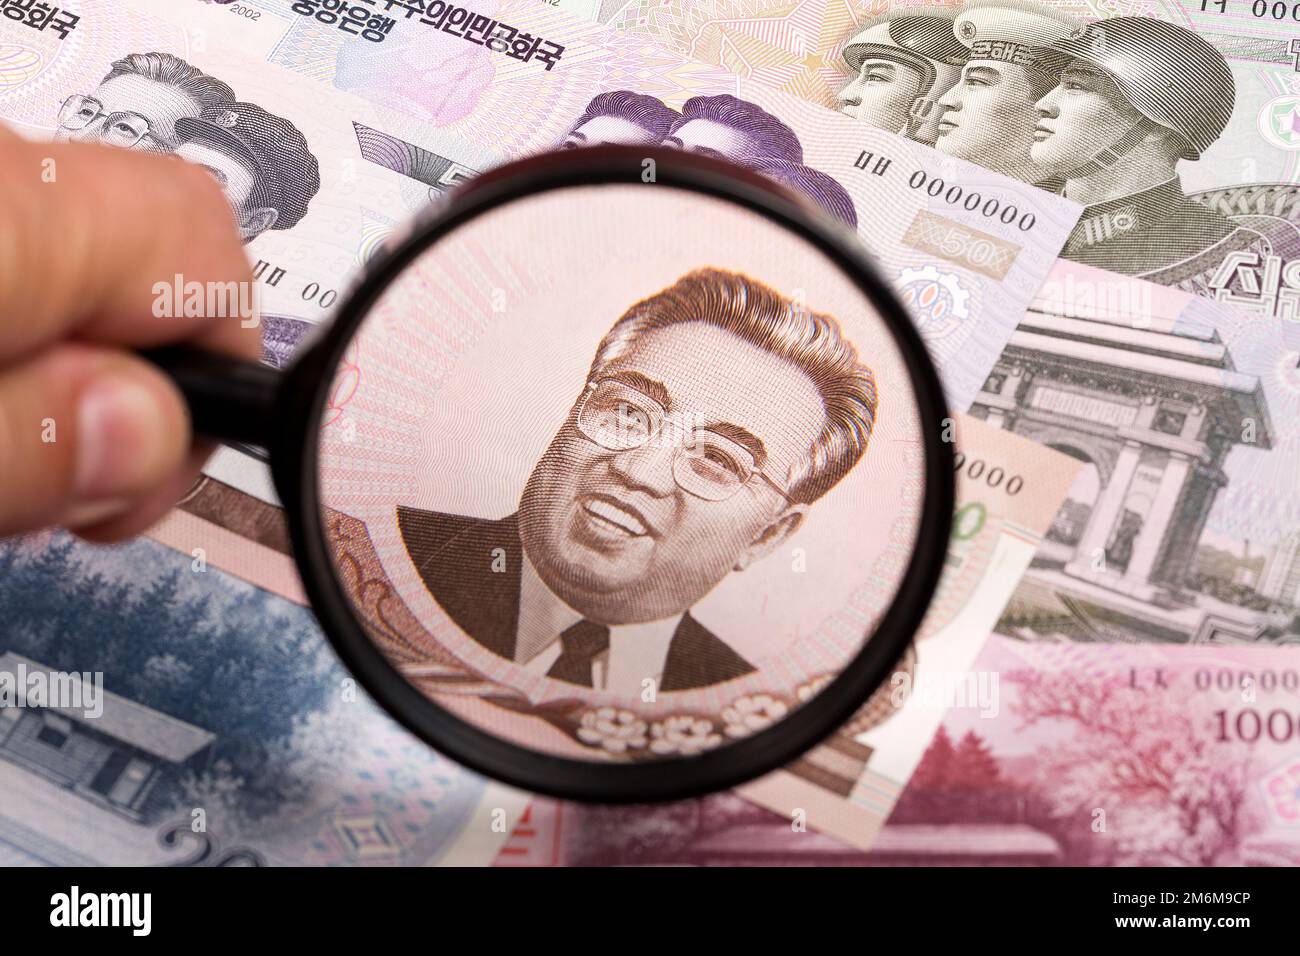 North Koreans money in a magnifying glass a business background Stock Photo